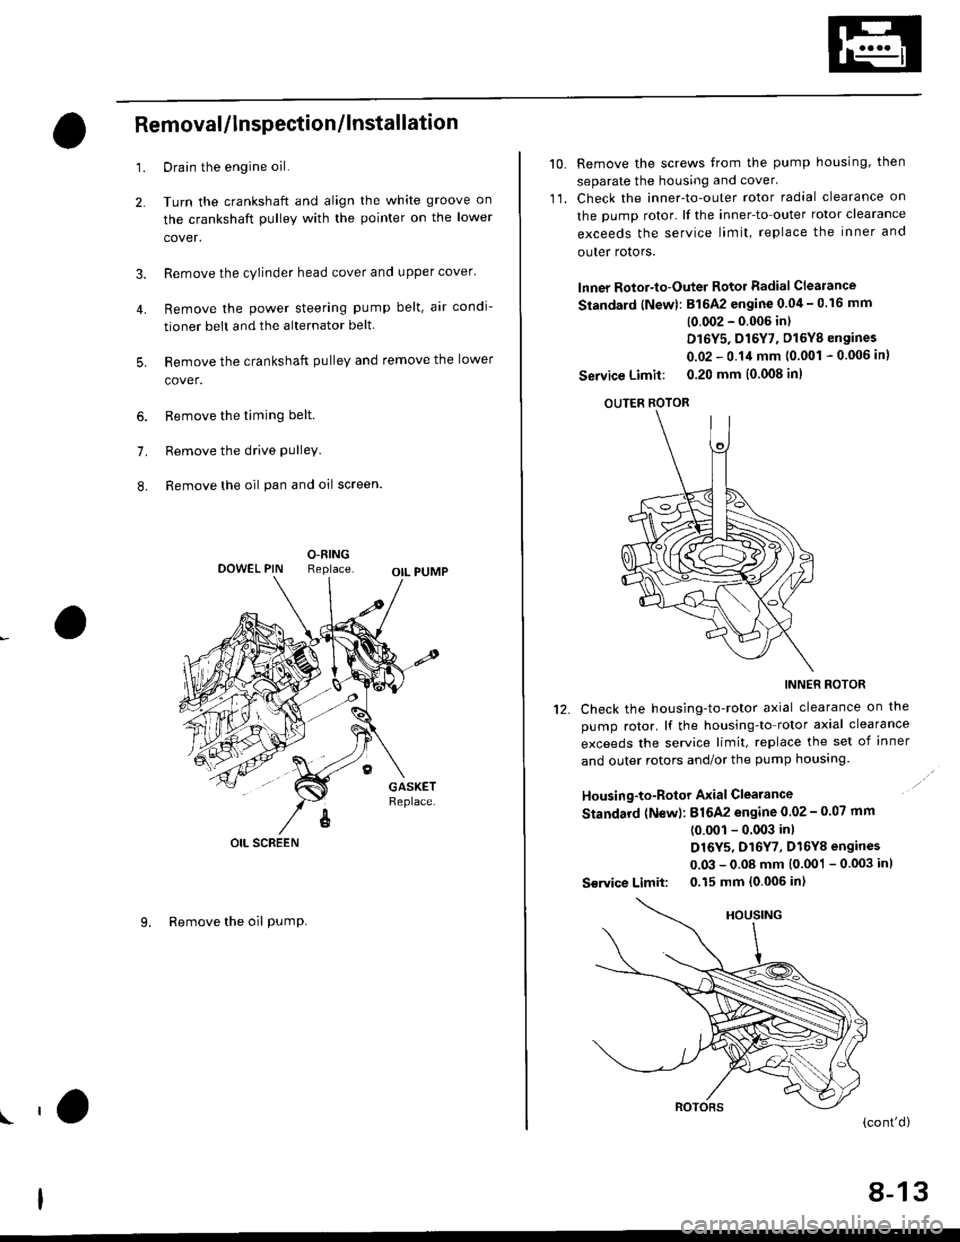 HONDA CIVIC 1997 6.G Workshop Manual 4.
Removal/lnspection/lnstallation
2.
3.
1.
5.
6.
1.
8.
Drain the engine oil.
Turn the crankshaft and align the white groove on
the crankshaft pulley with the pointer on the lower
cover.
Remove the cy